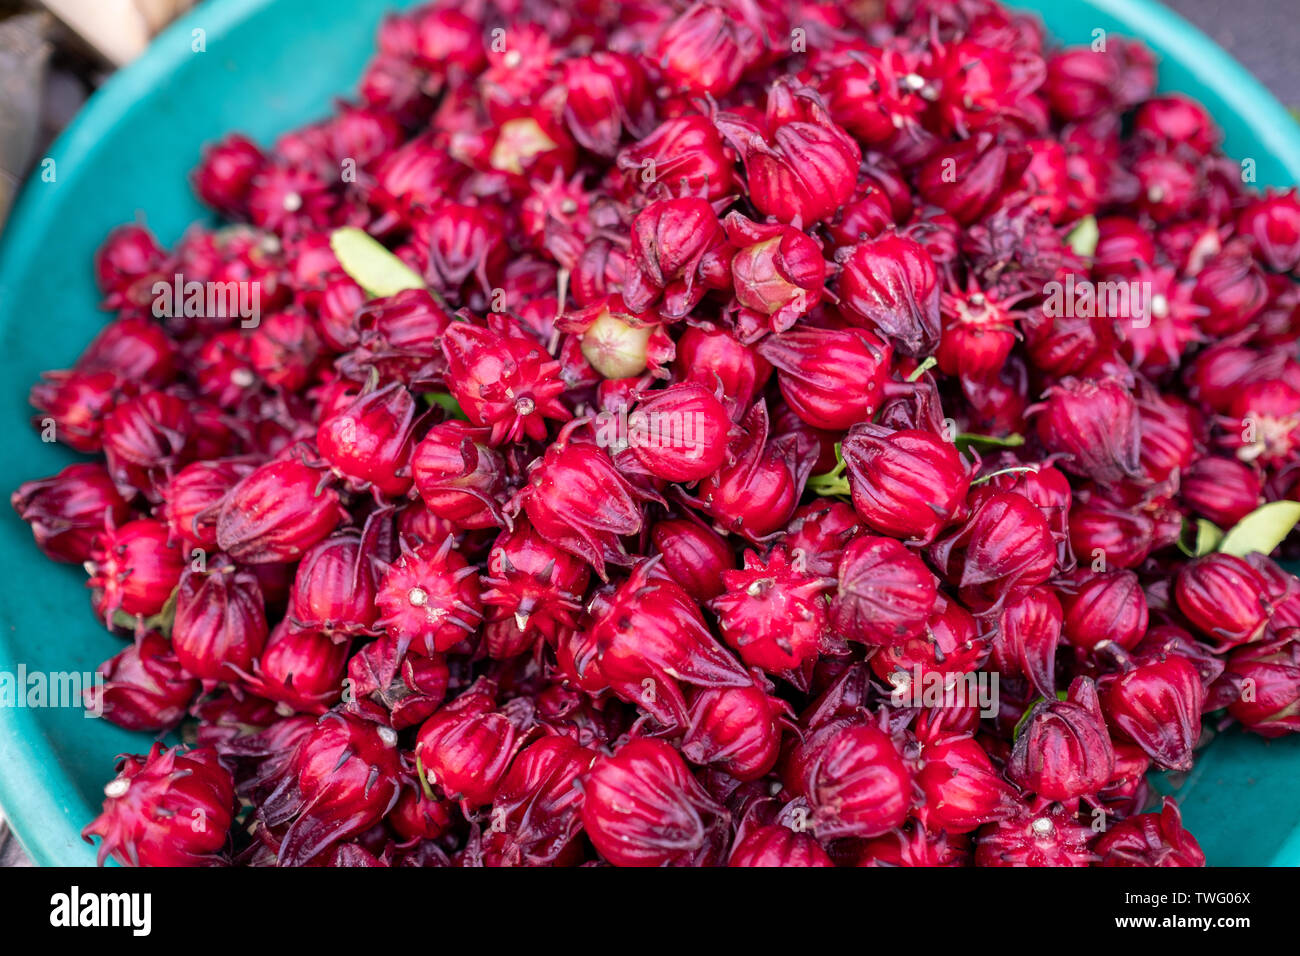 Overhead view of Roselle, Thailand Stock Photo